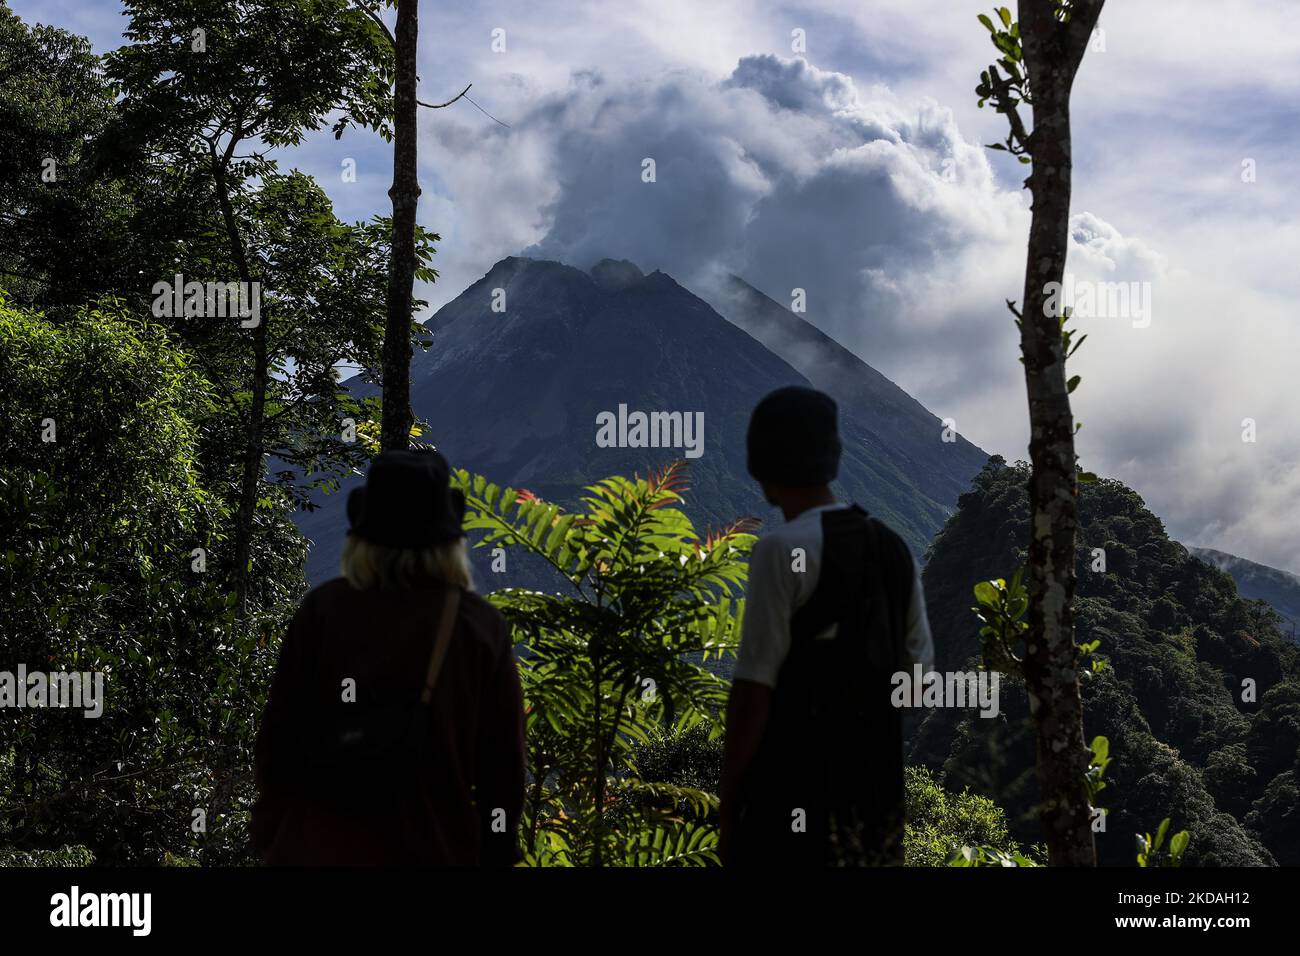 Farmers look at Mount Merapi as it erupts several times as seen from Turgo village, Sleman district in Yogyakarta, Indonesia on May 13, 2022. Merapi is located in one of the most densely populated parts of Java with over 11,000 people living on the slopes of the mountain. Mount Merapi, measuring 2,968 metres high, is known as one of the most active volcanoes in Indonesia, with an eruption occurring every two to five years. (Photo by Garry Lotulung/NurPhoto) Stock Photo